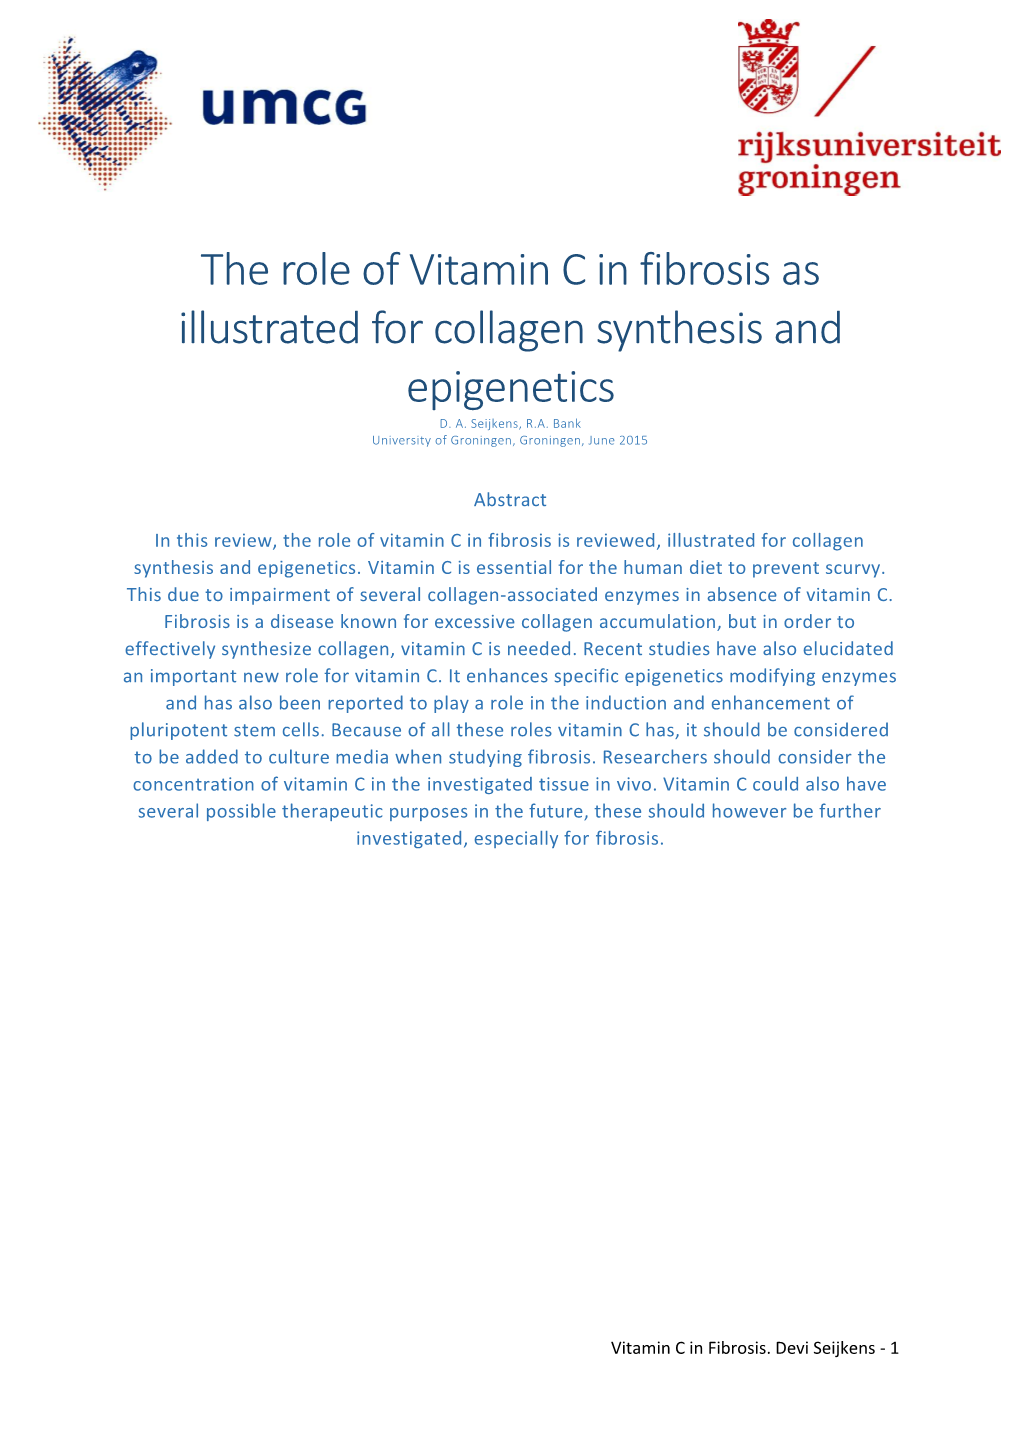 The Role of Vitamin C in Fibrosis As Illustrated for Collagen Synthesis and Epigenetics D